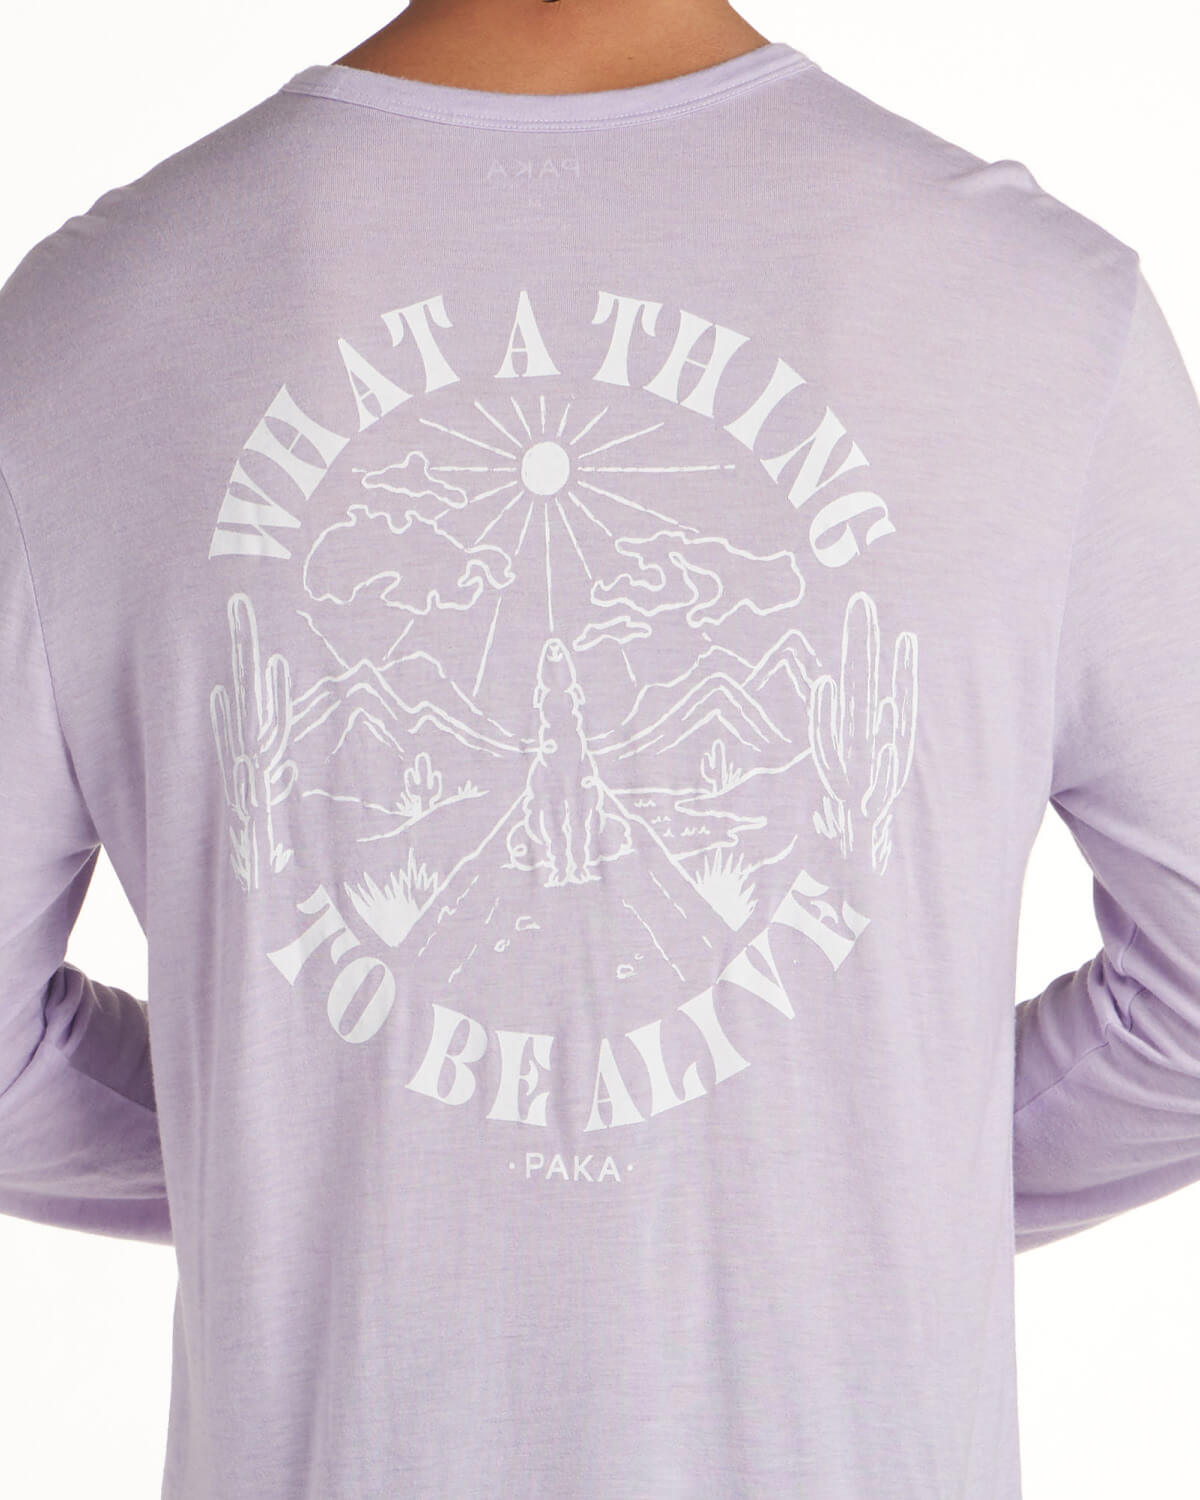 Lavender alpaca base layer on model back shot with image of alpaca and text that says "what a thing to be alive"